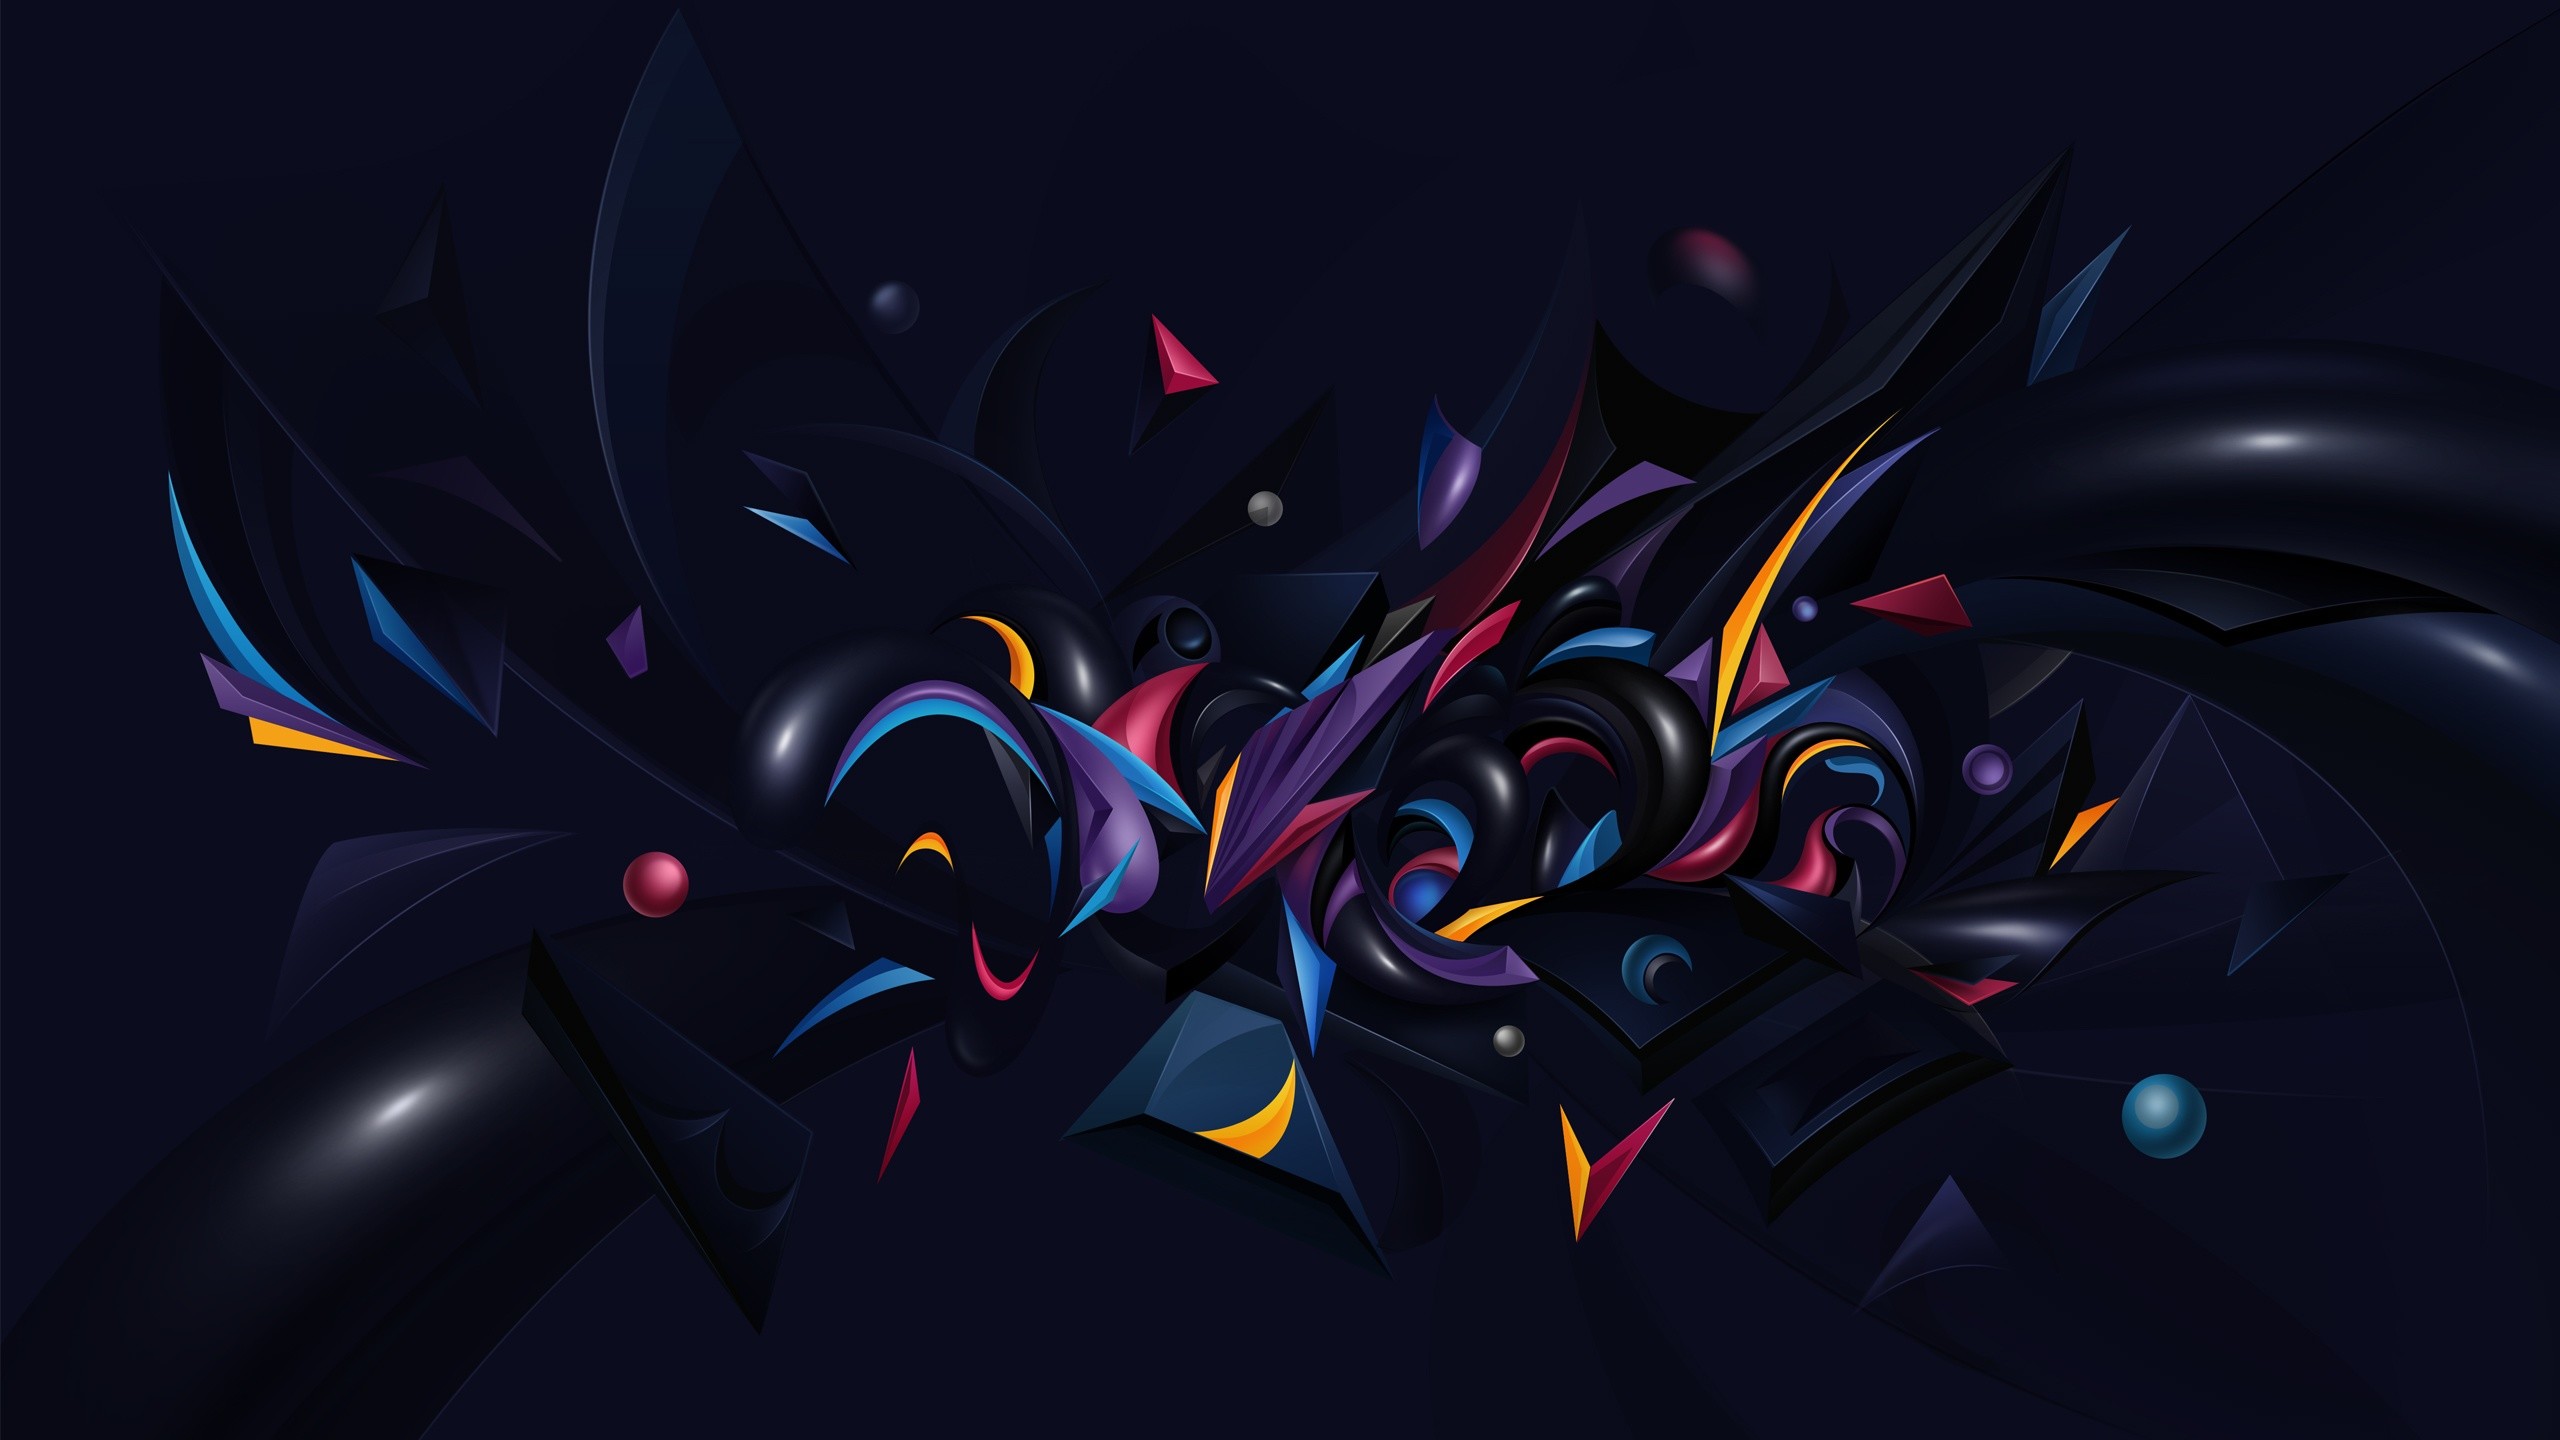 Abstract Wallpaper HD Wallpapers Backgrounds of Your Choice Wallpaper Hd Abstract Wallpapers